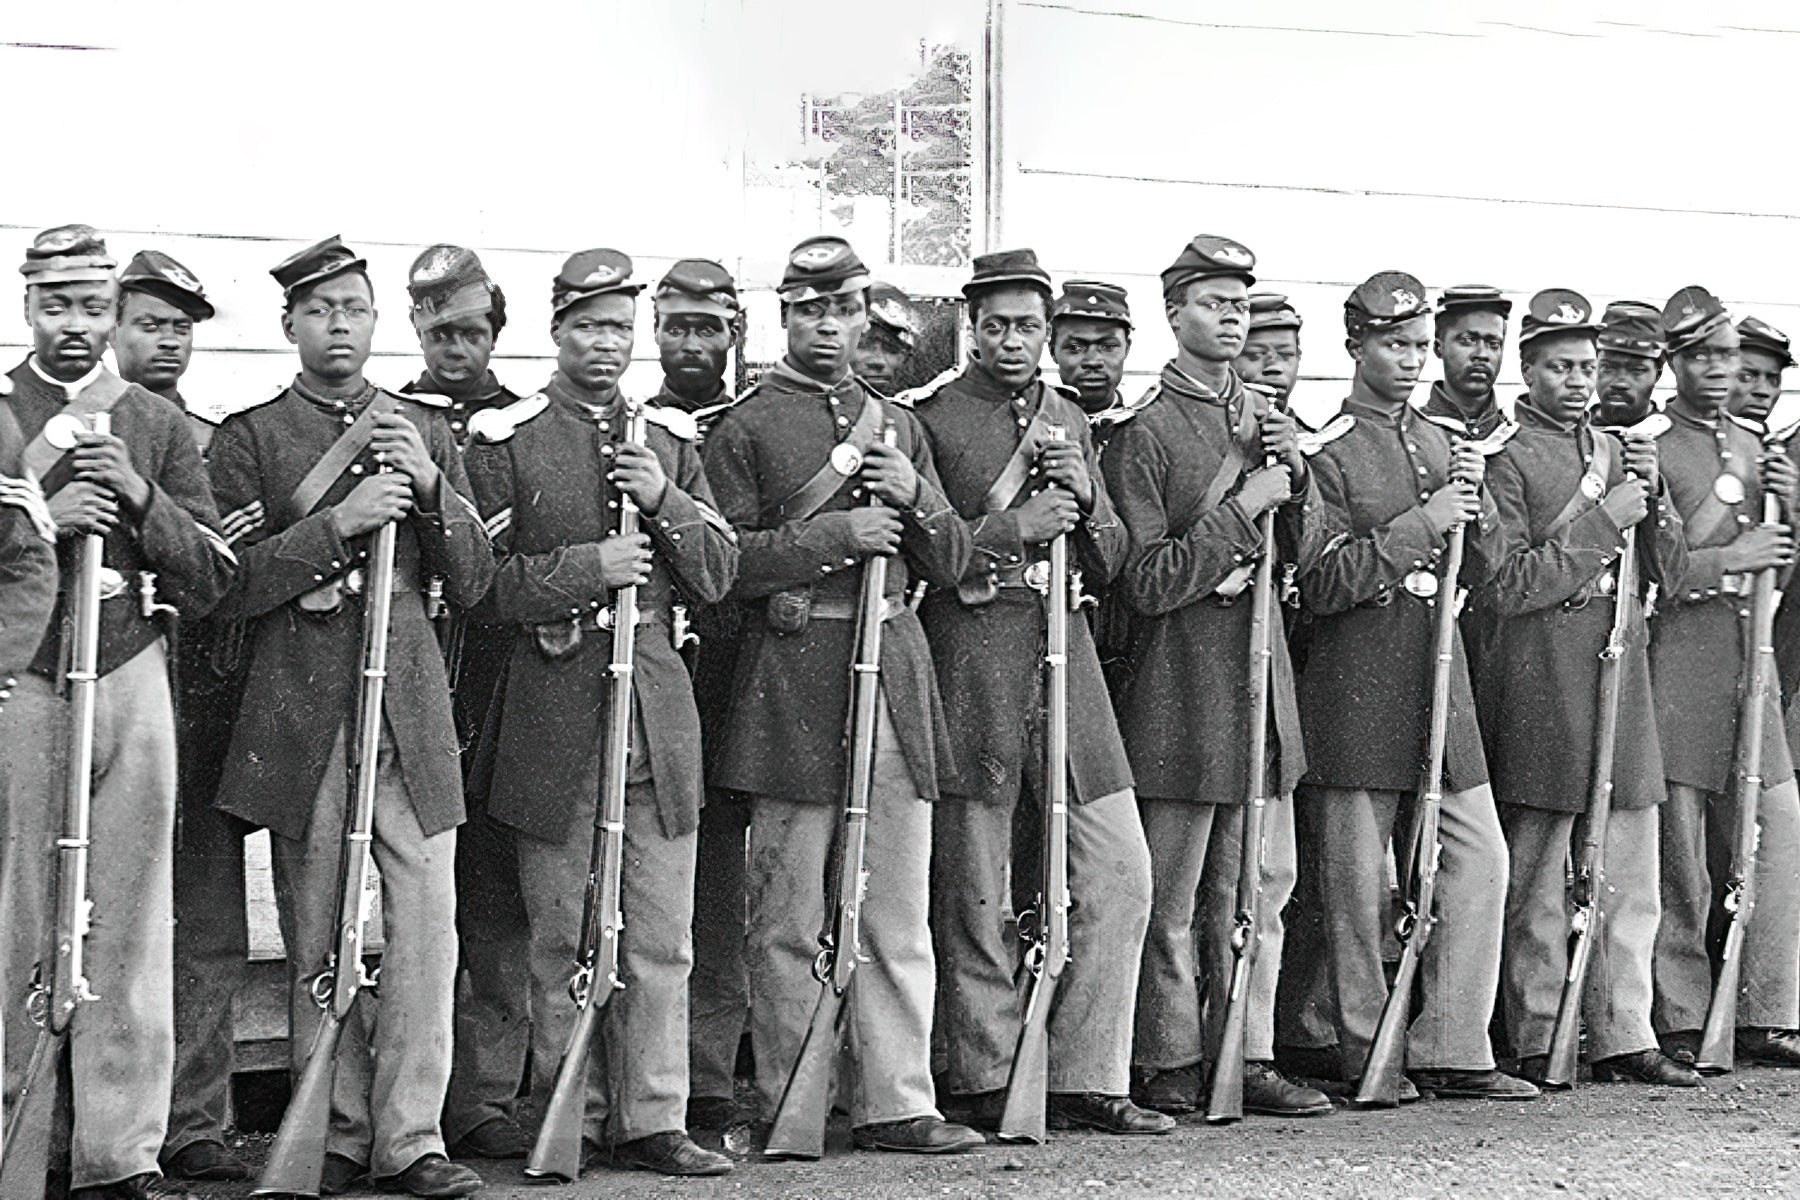 Almanac: The Second Confiscation & Militia Act (July 17, 1862) - Image of the 10th Cavalry